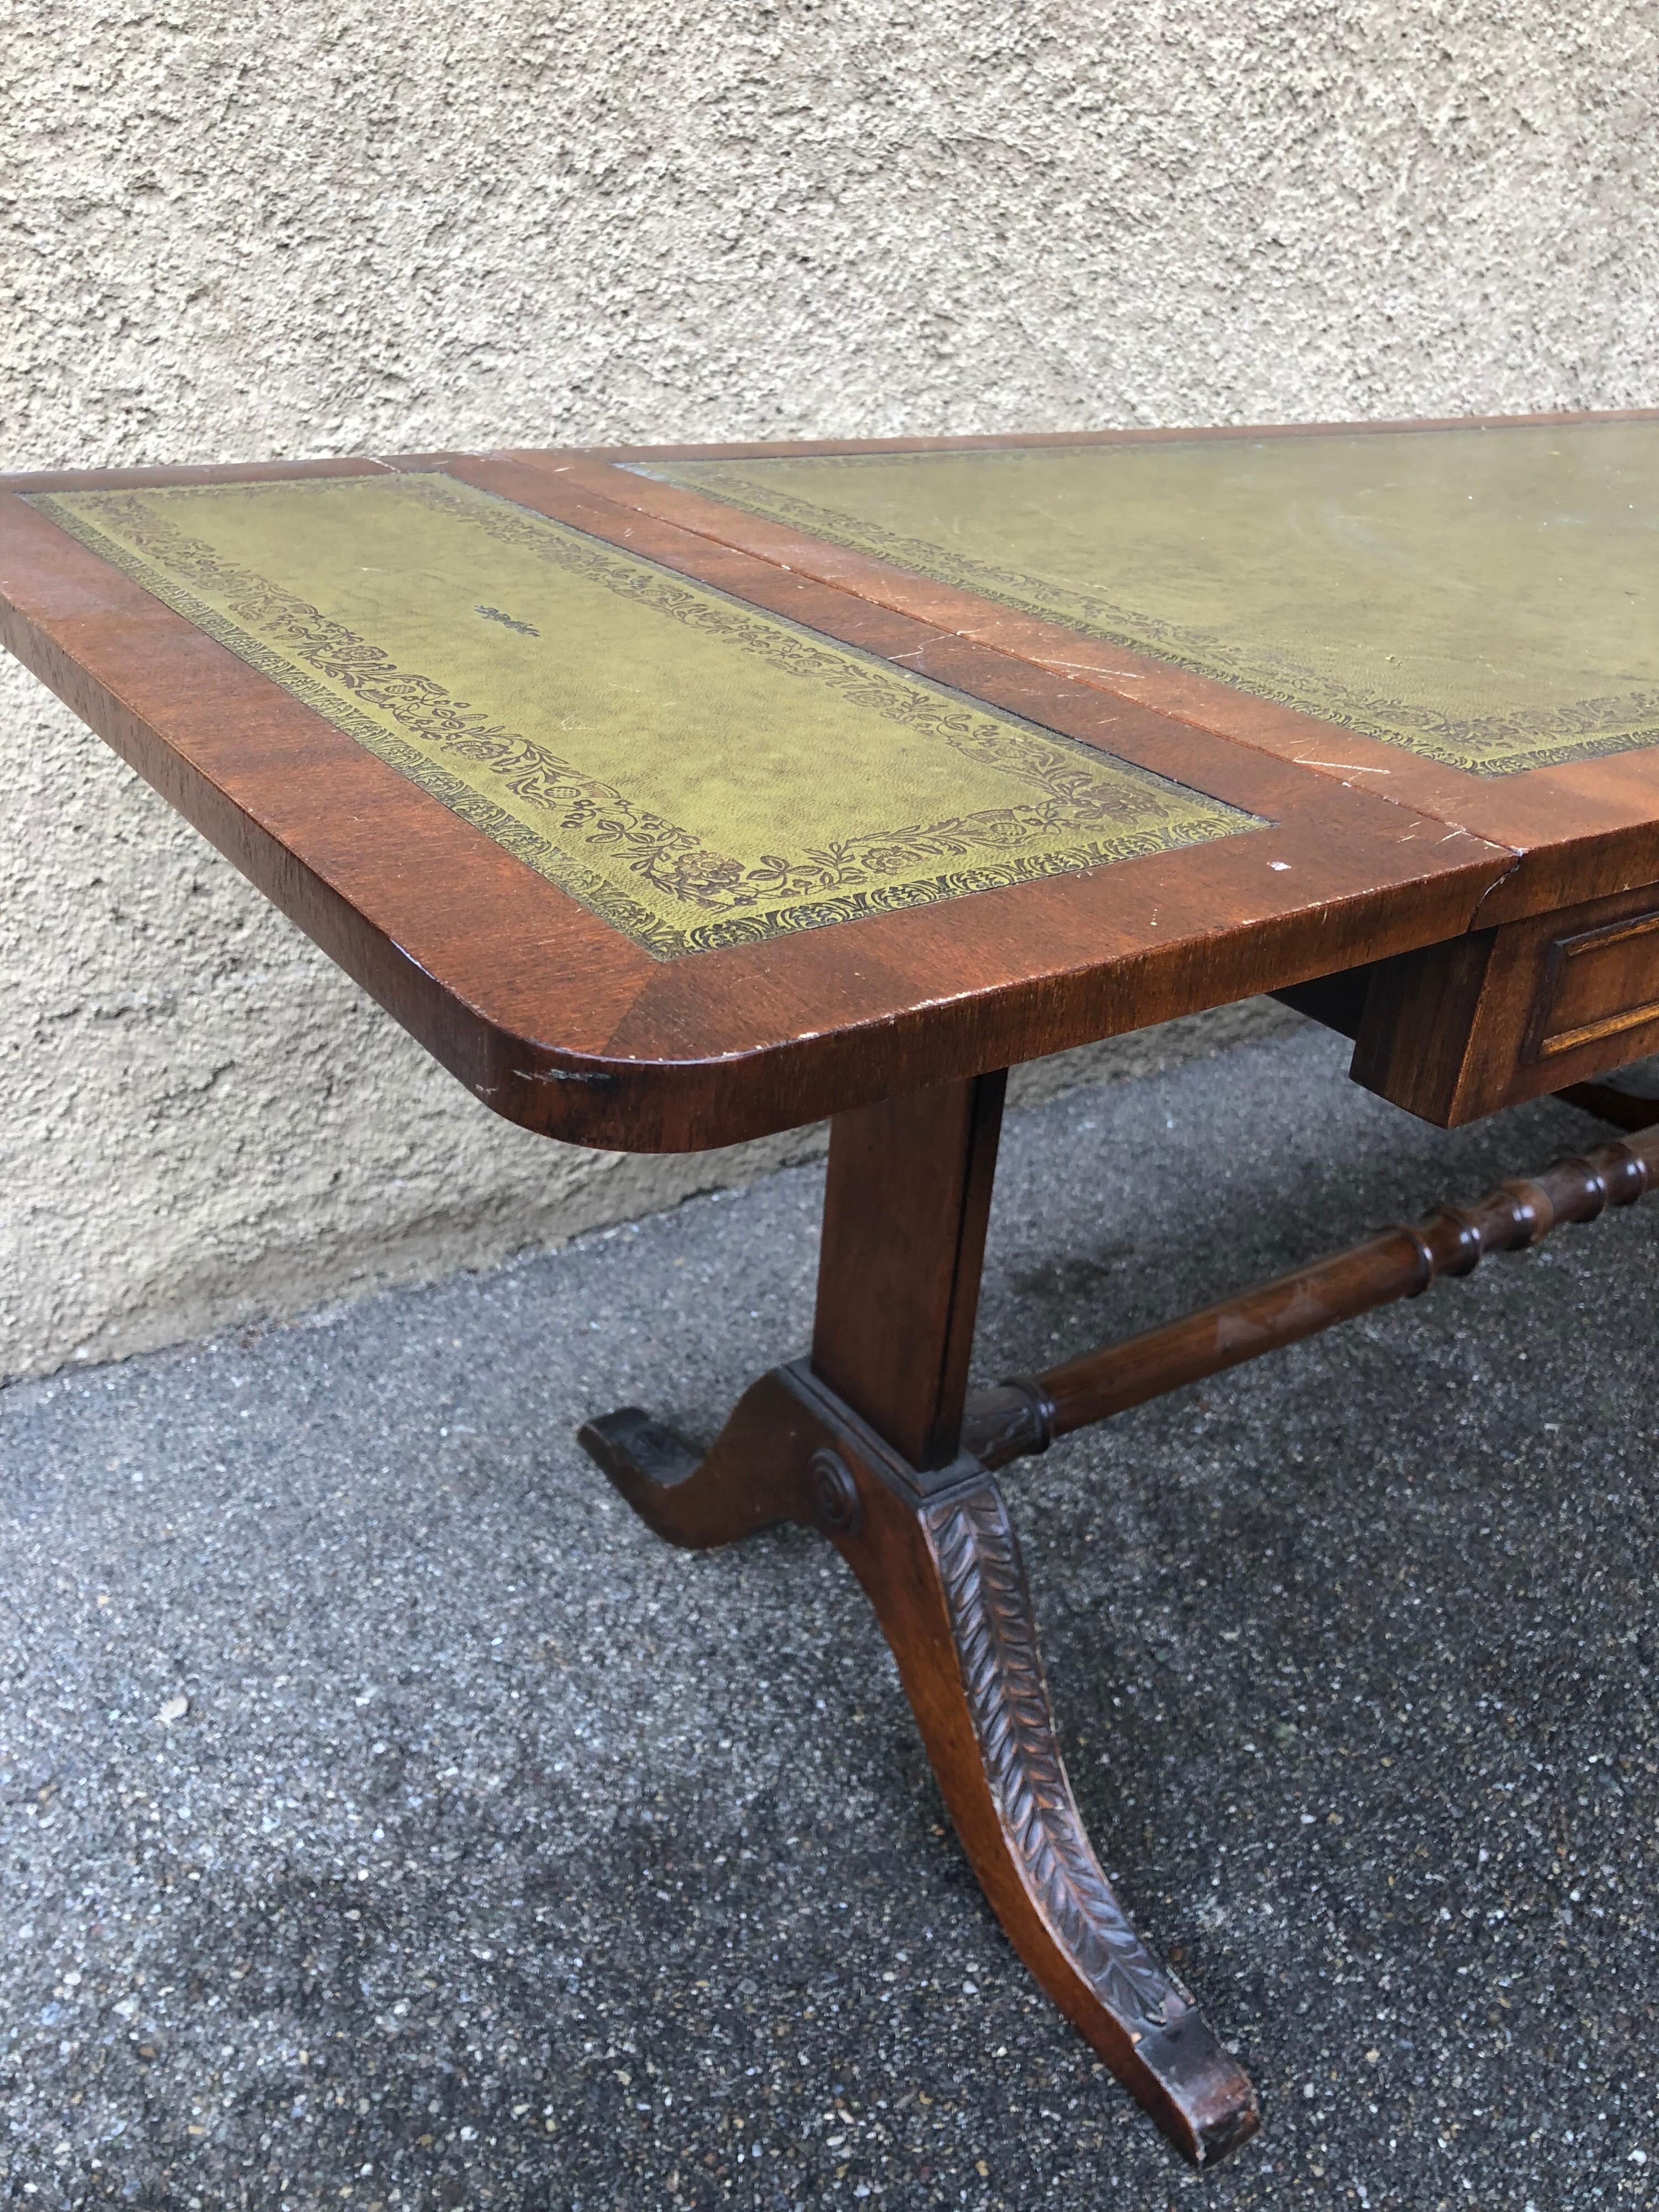 Hand-Carved Regency Wood Low Coffee Green Leather Foldable Table